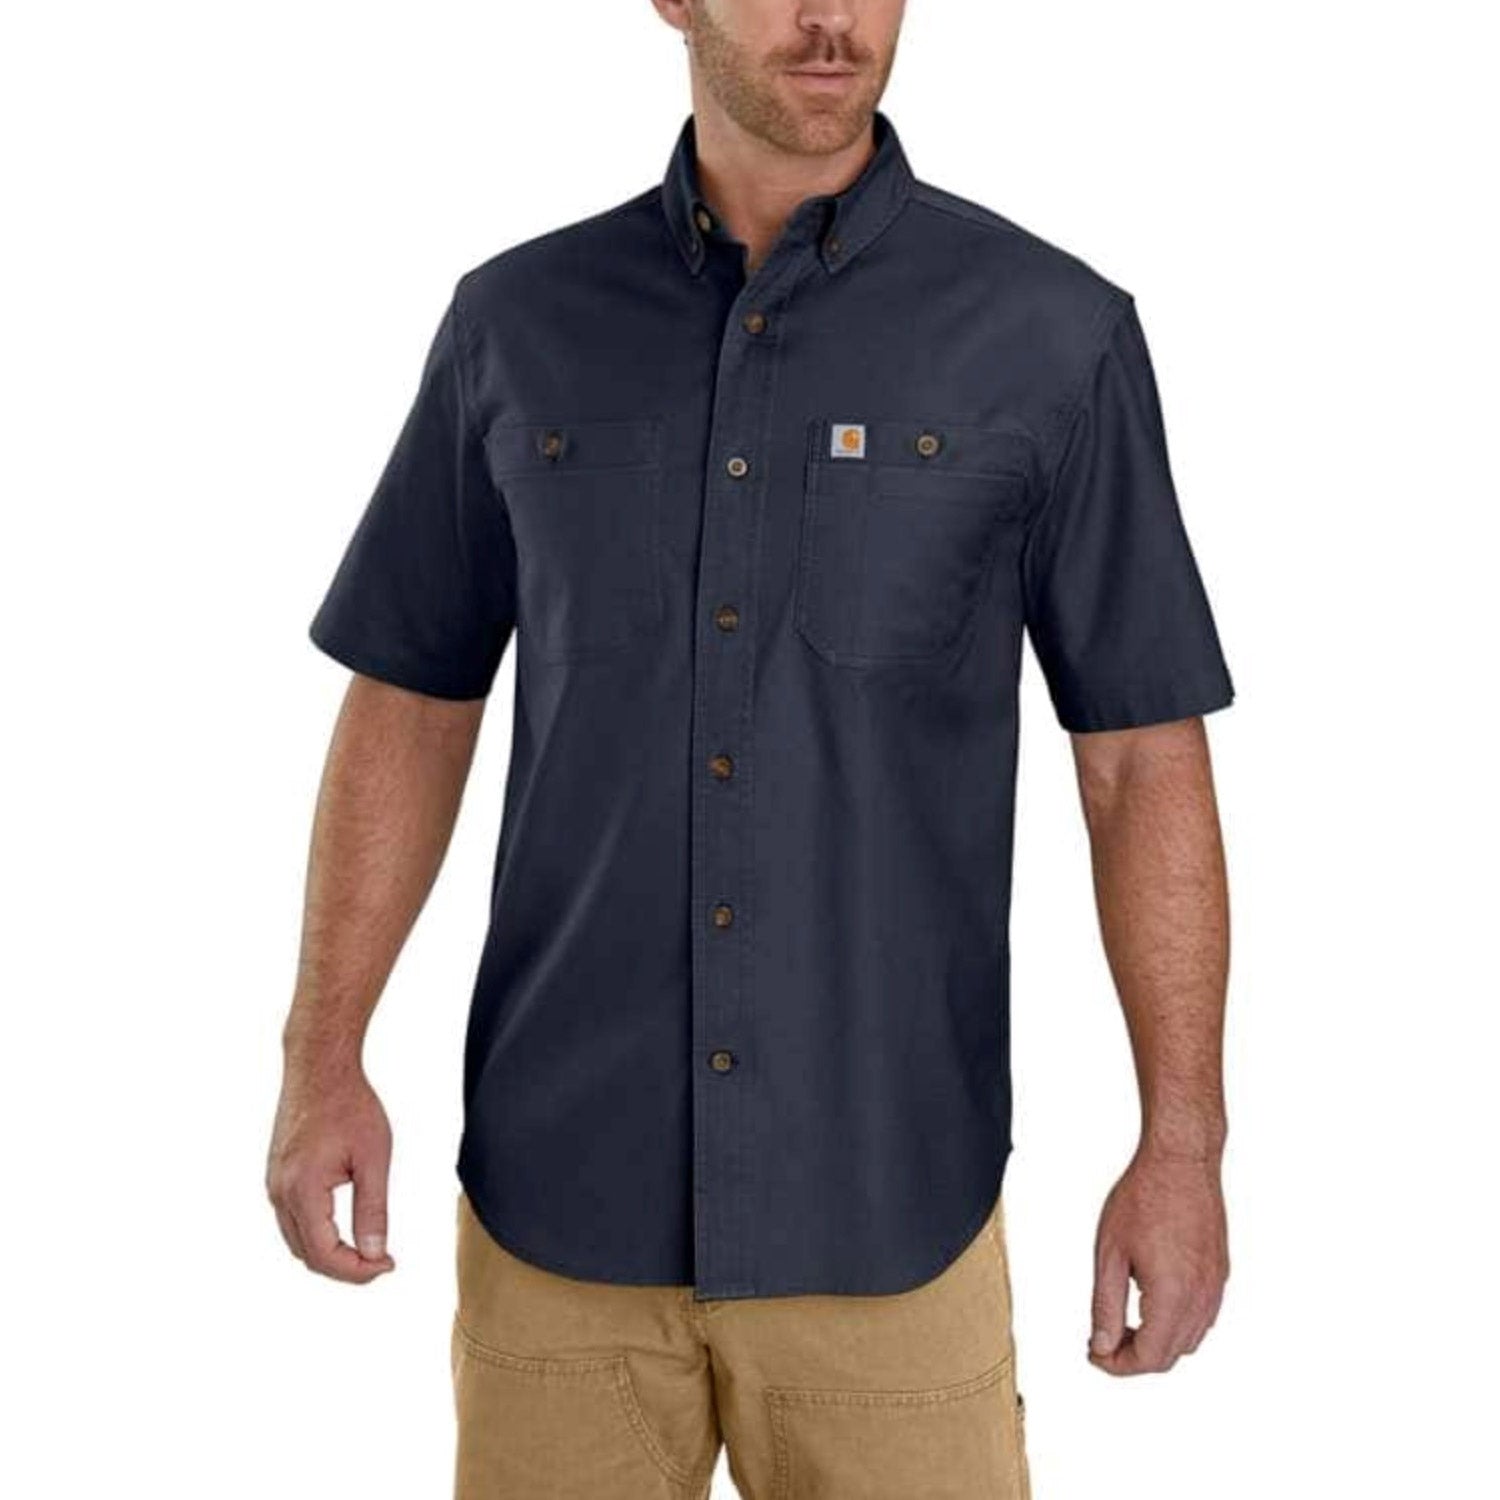 B91Xz Work Shirts for Men Mens Spring Summer Casual Sports Check